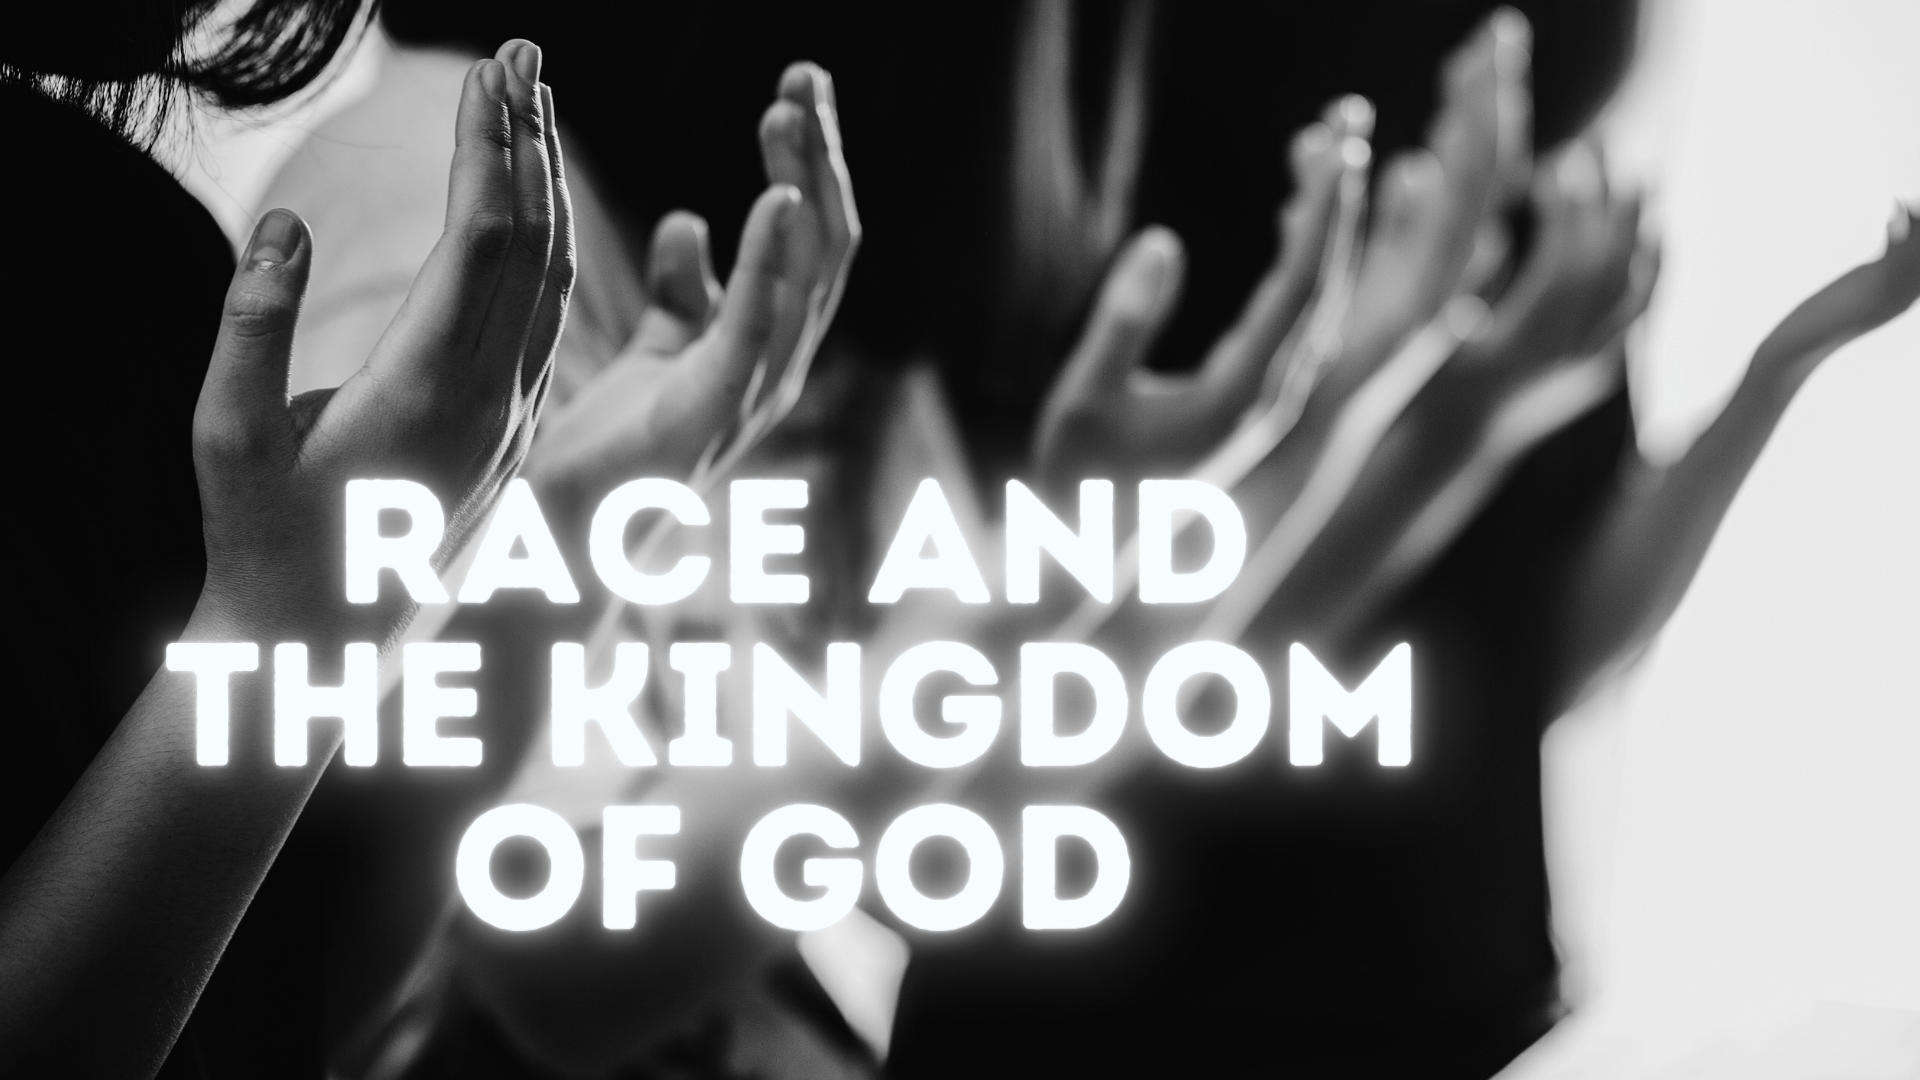 Race and the Kingdom of God